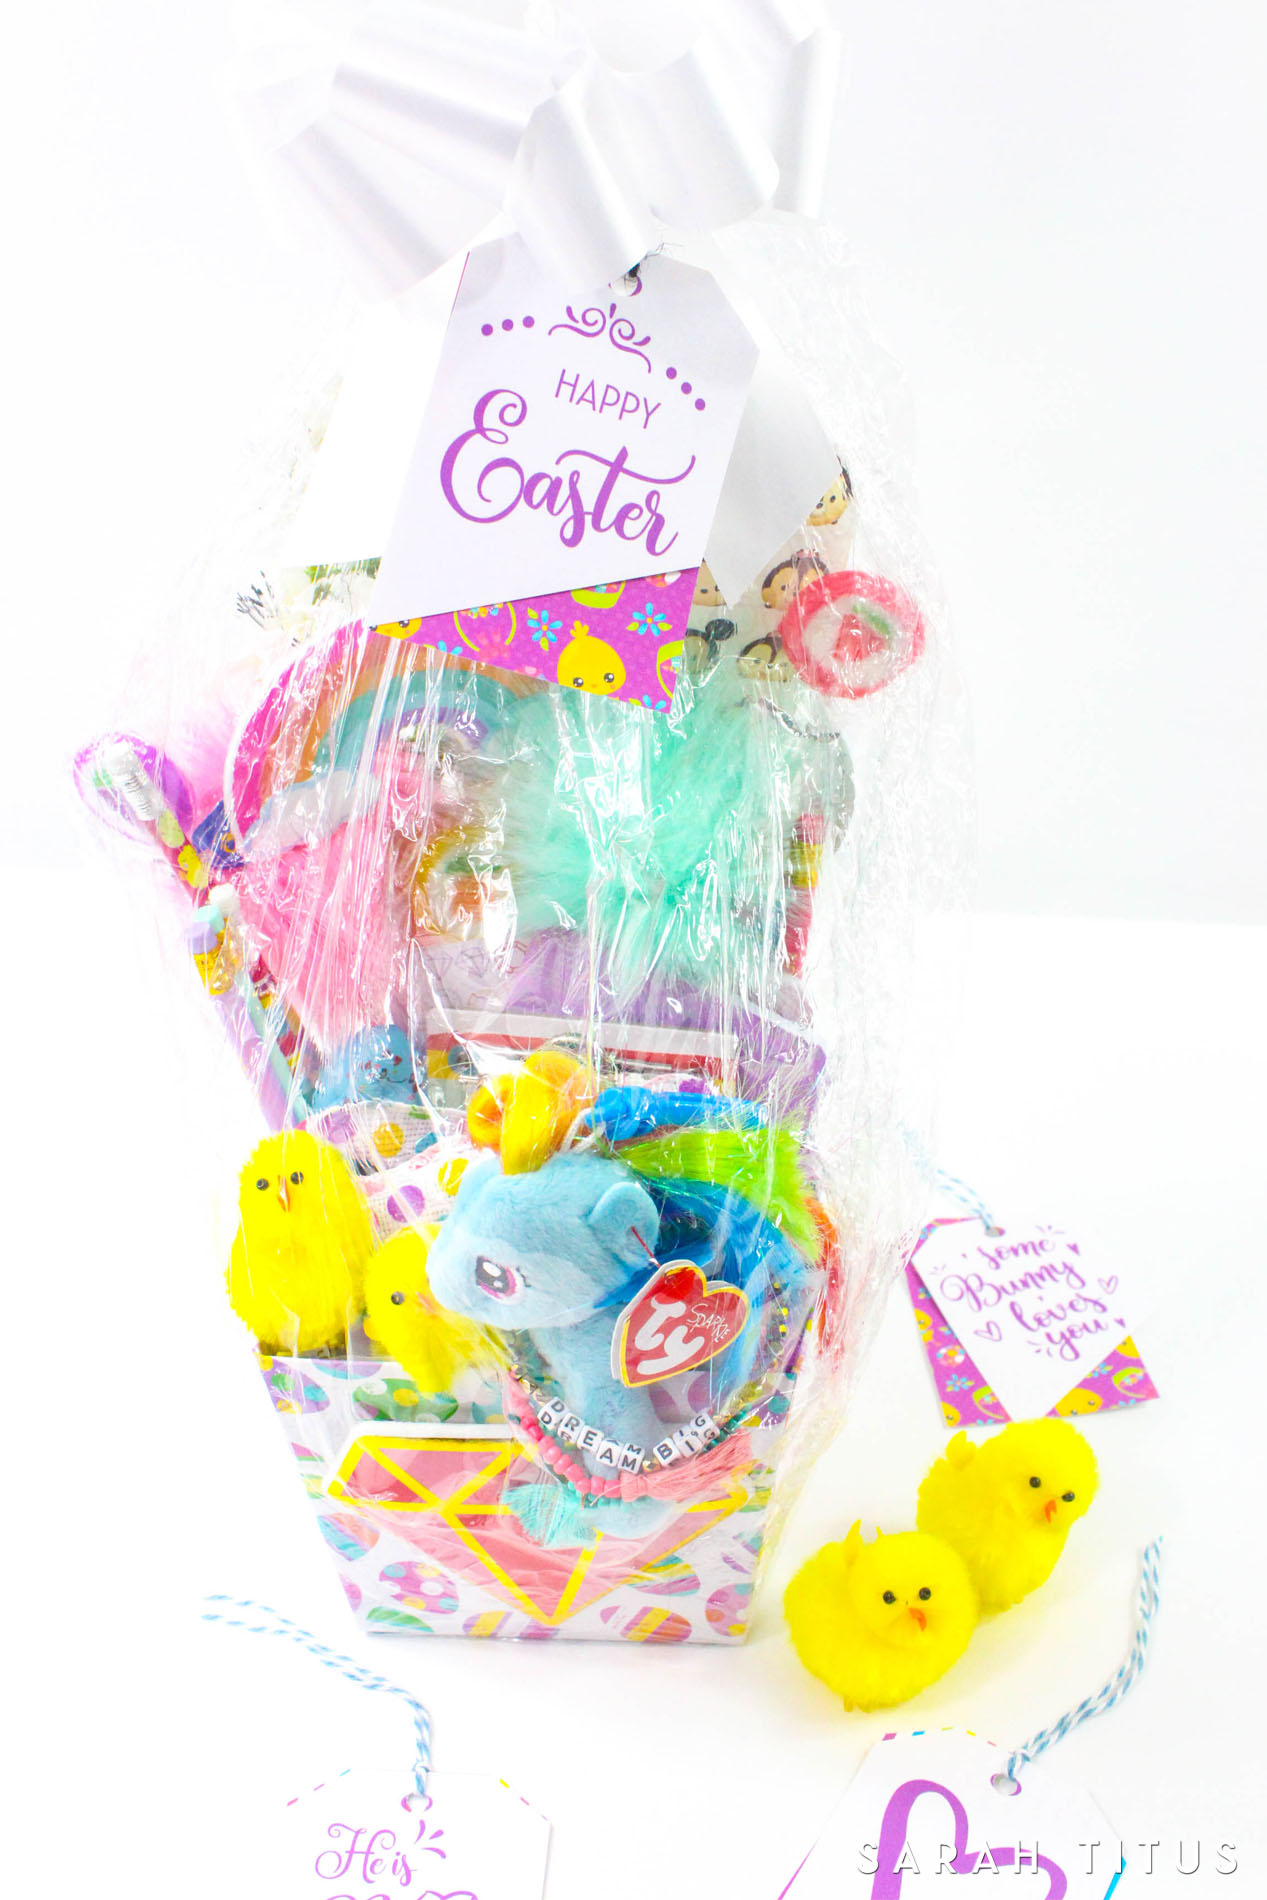 Use them for gifts, on your Easter baskets, as place cards, as bookmarks; these free printable Easter gift tags have dozens of unique uses! Click over to access and get your free 100+ page Easter binder while you're here!!!